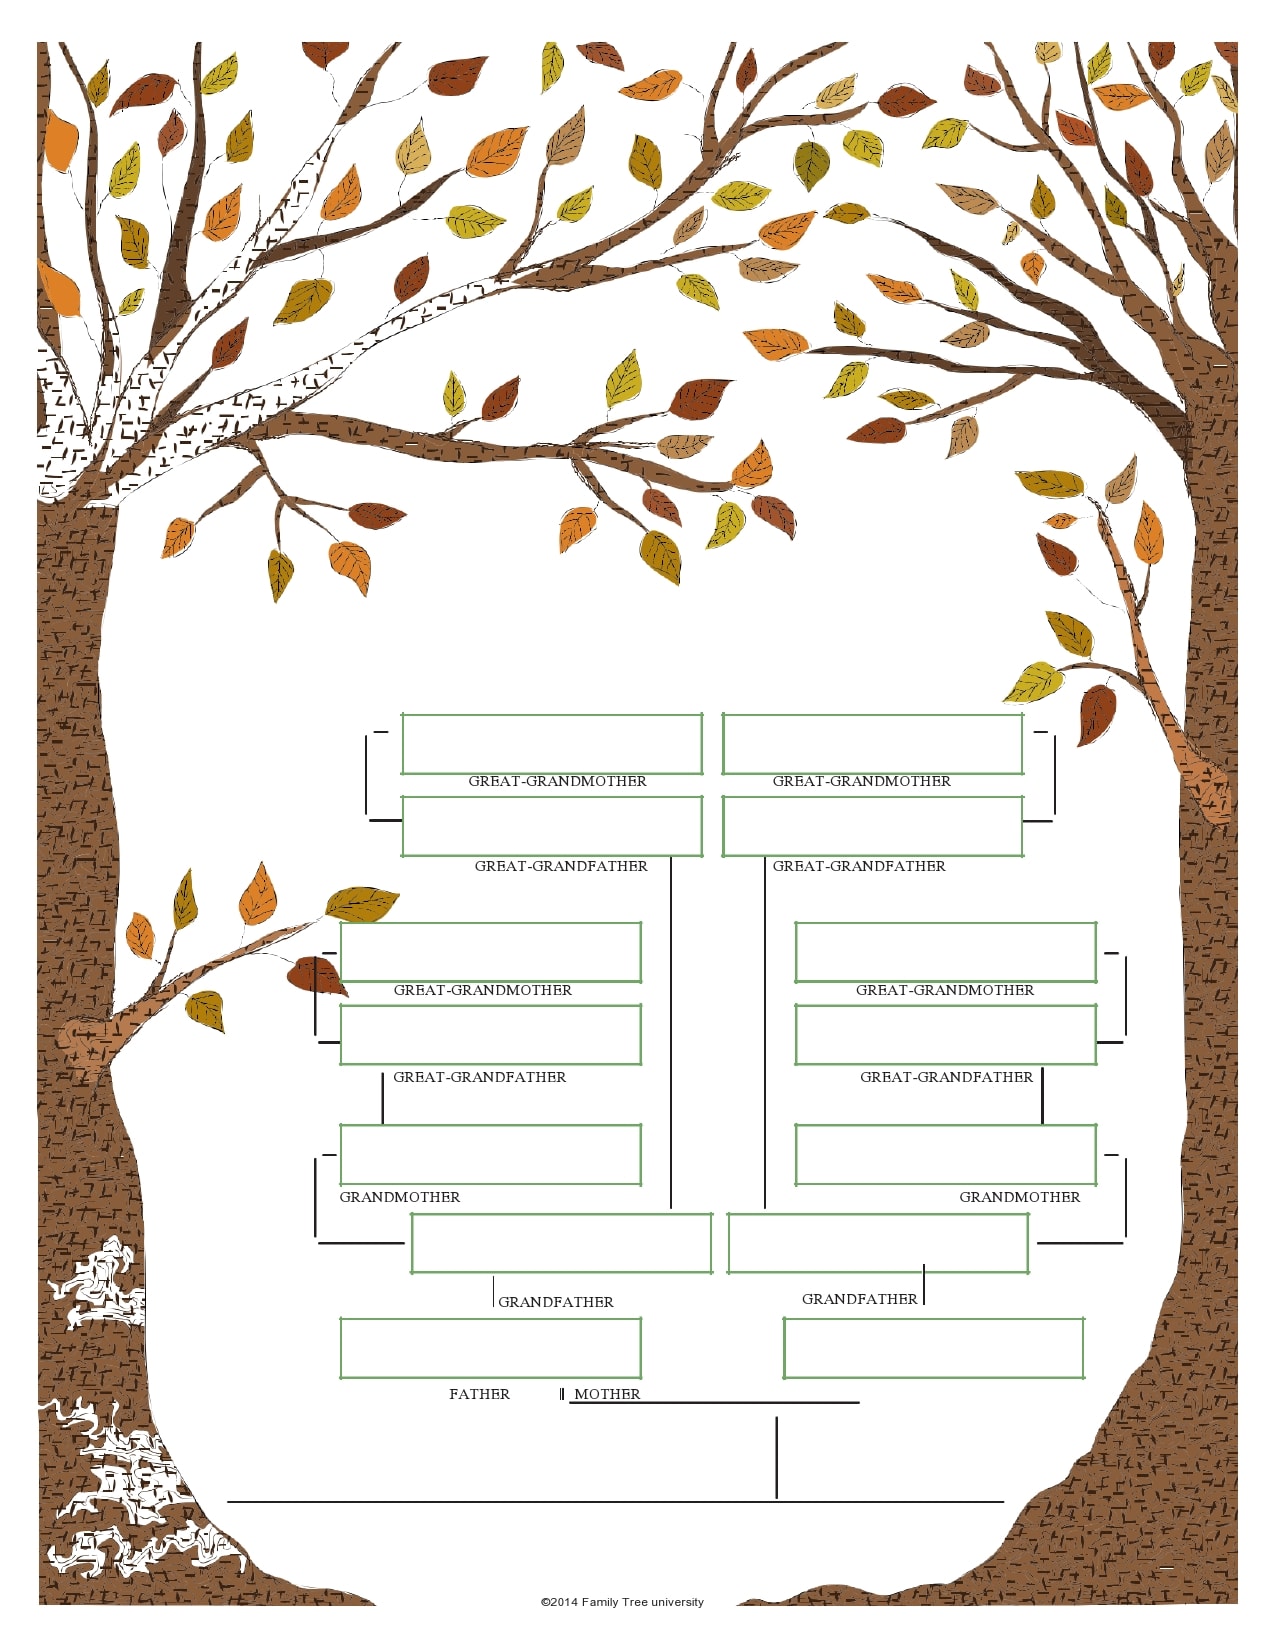 21 Editable Family Tree Templates [21% Free] - TemplateArchive Within Fill In The Blank Family Tree Template